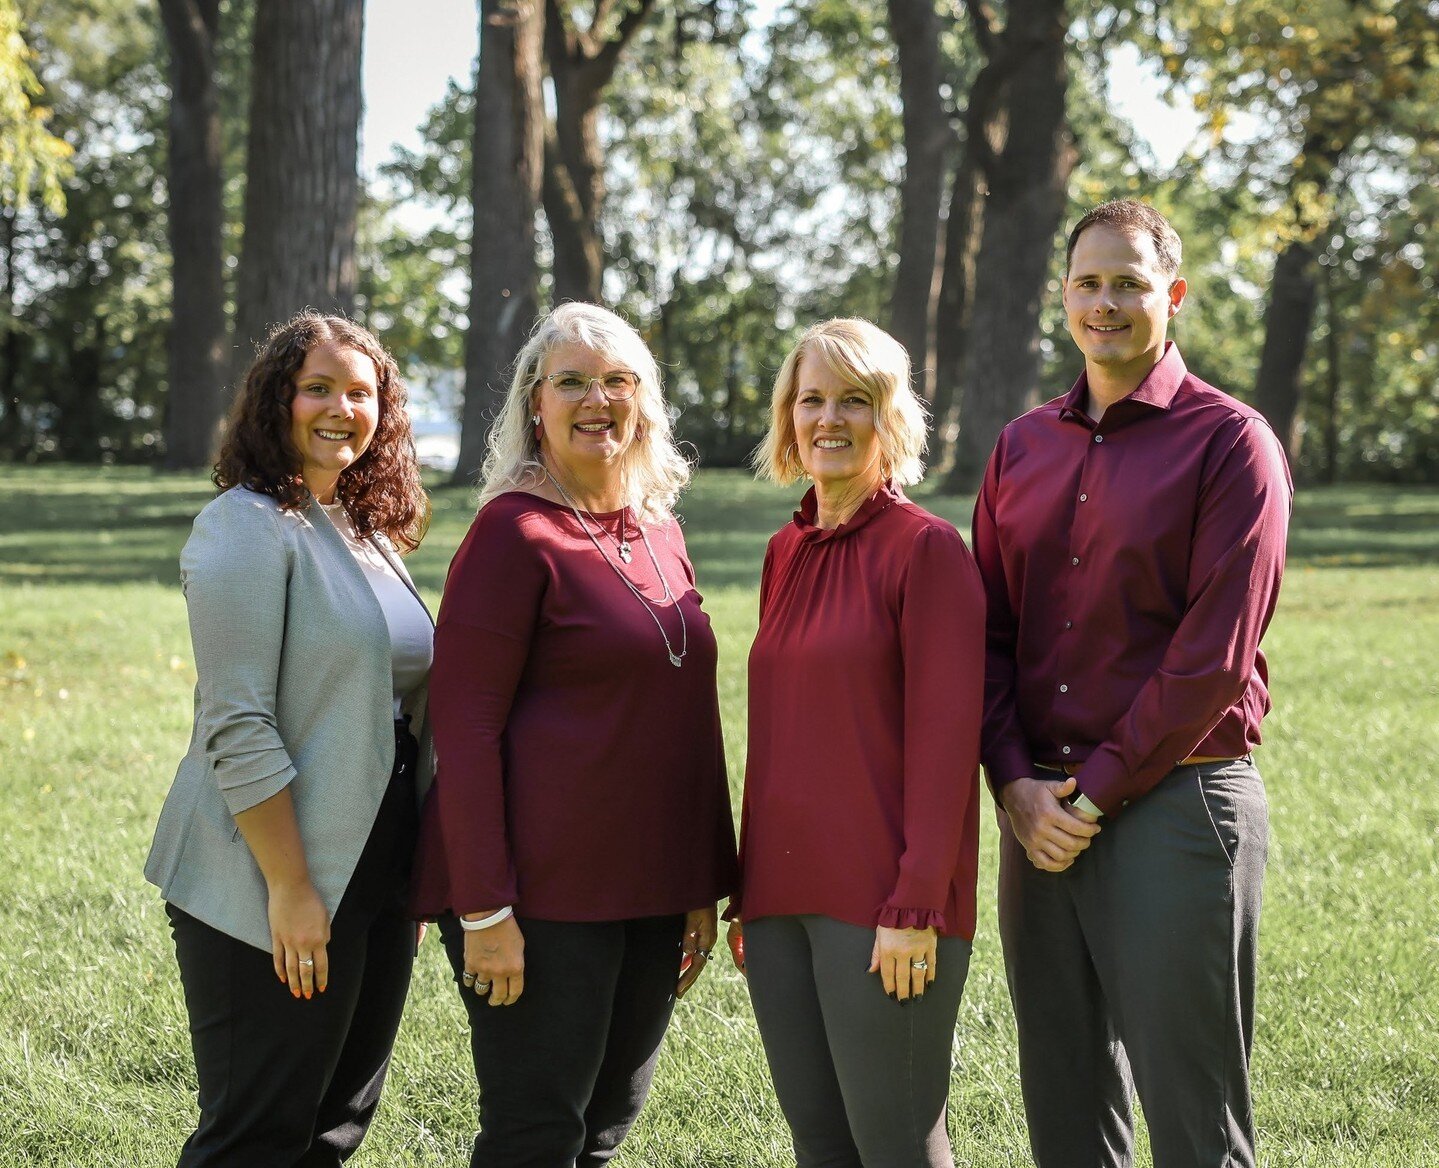 Say hello to our Crop Insurance team: Shelby, Jennifer, Veronica, and Kane (pictured left to right). Here's a little intro to our team 👇️⁠
⁠
Jennifer is one of our Crop Insurance agents here at HFM. She grew up on the Miller farm, along with Veronic